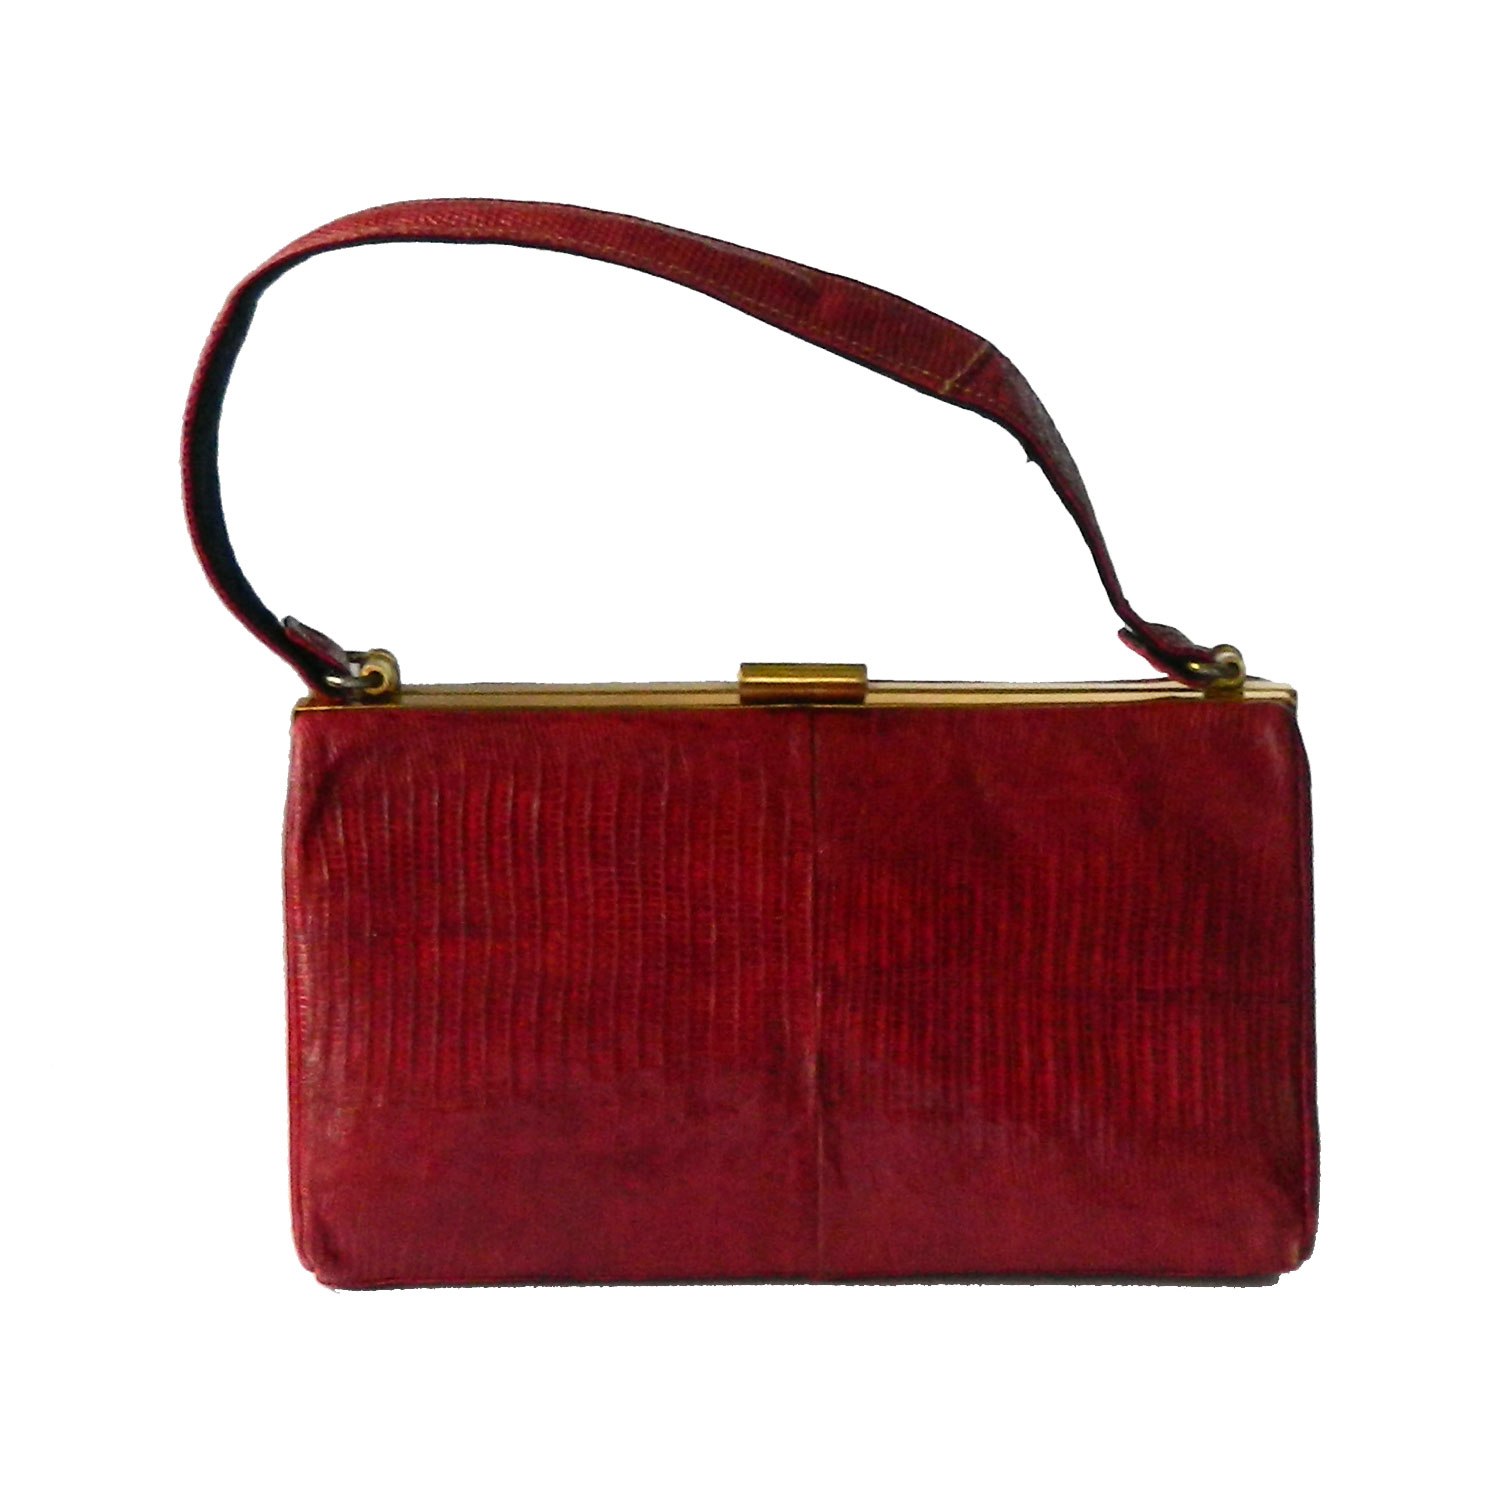 1940s red leather purse